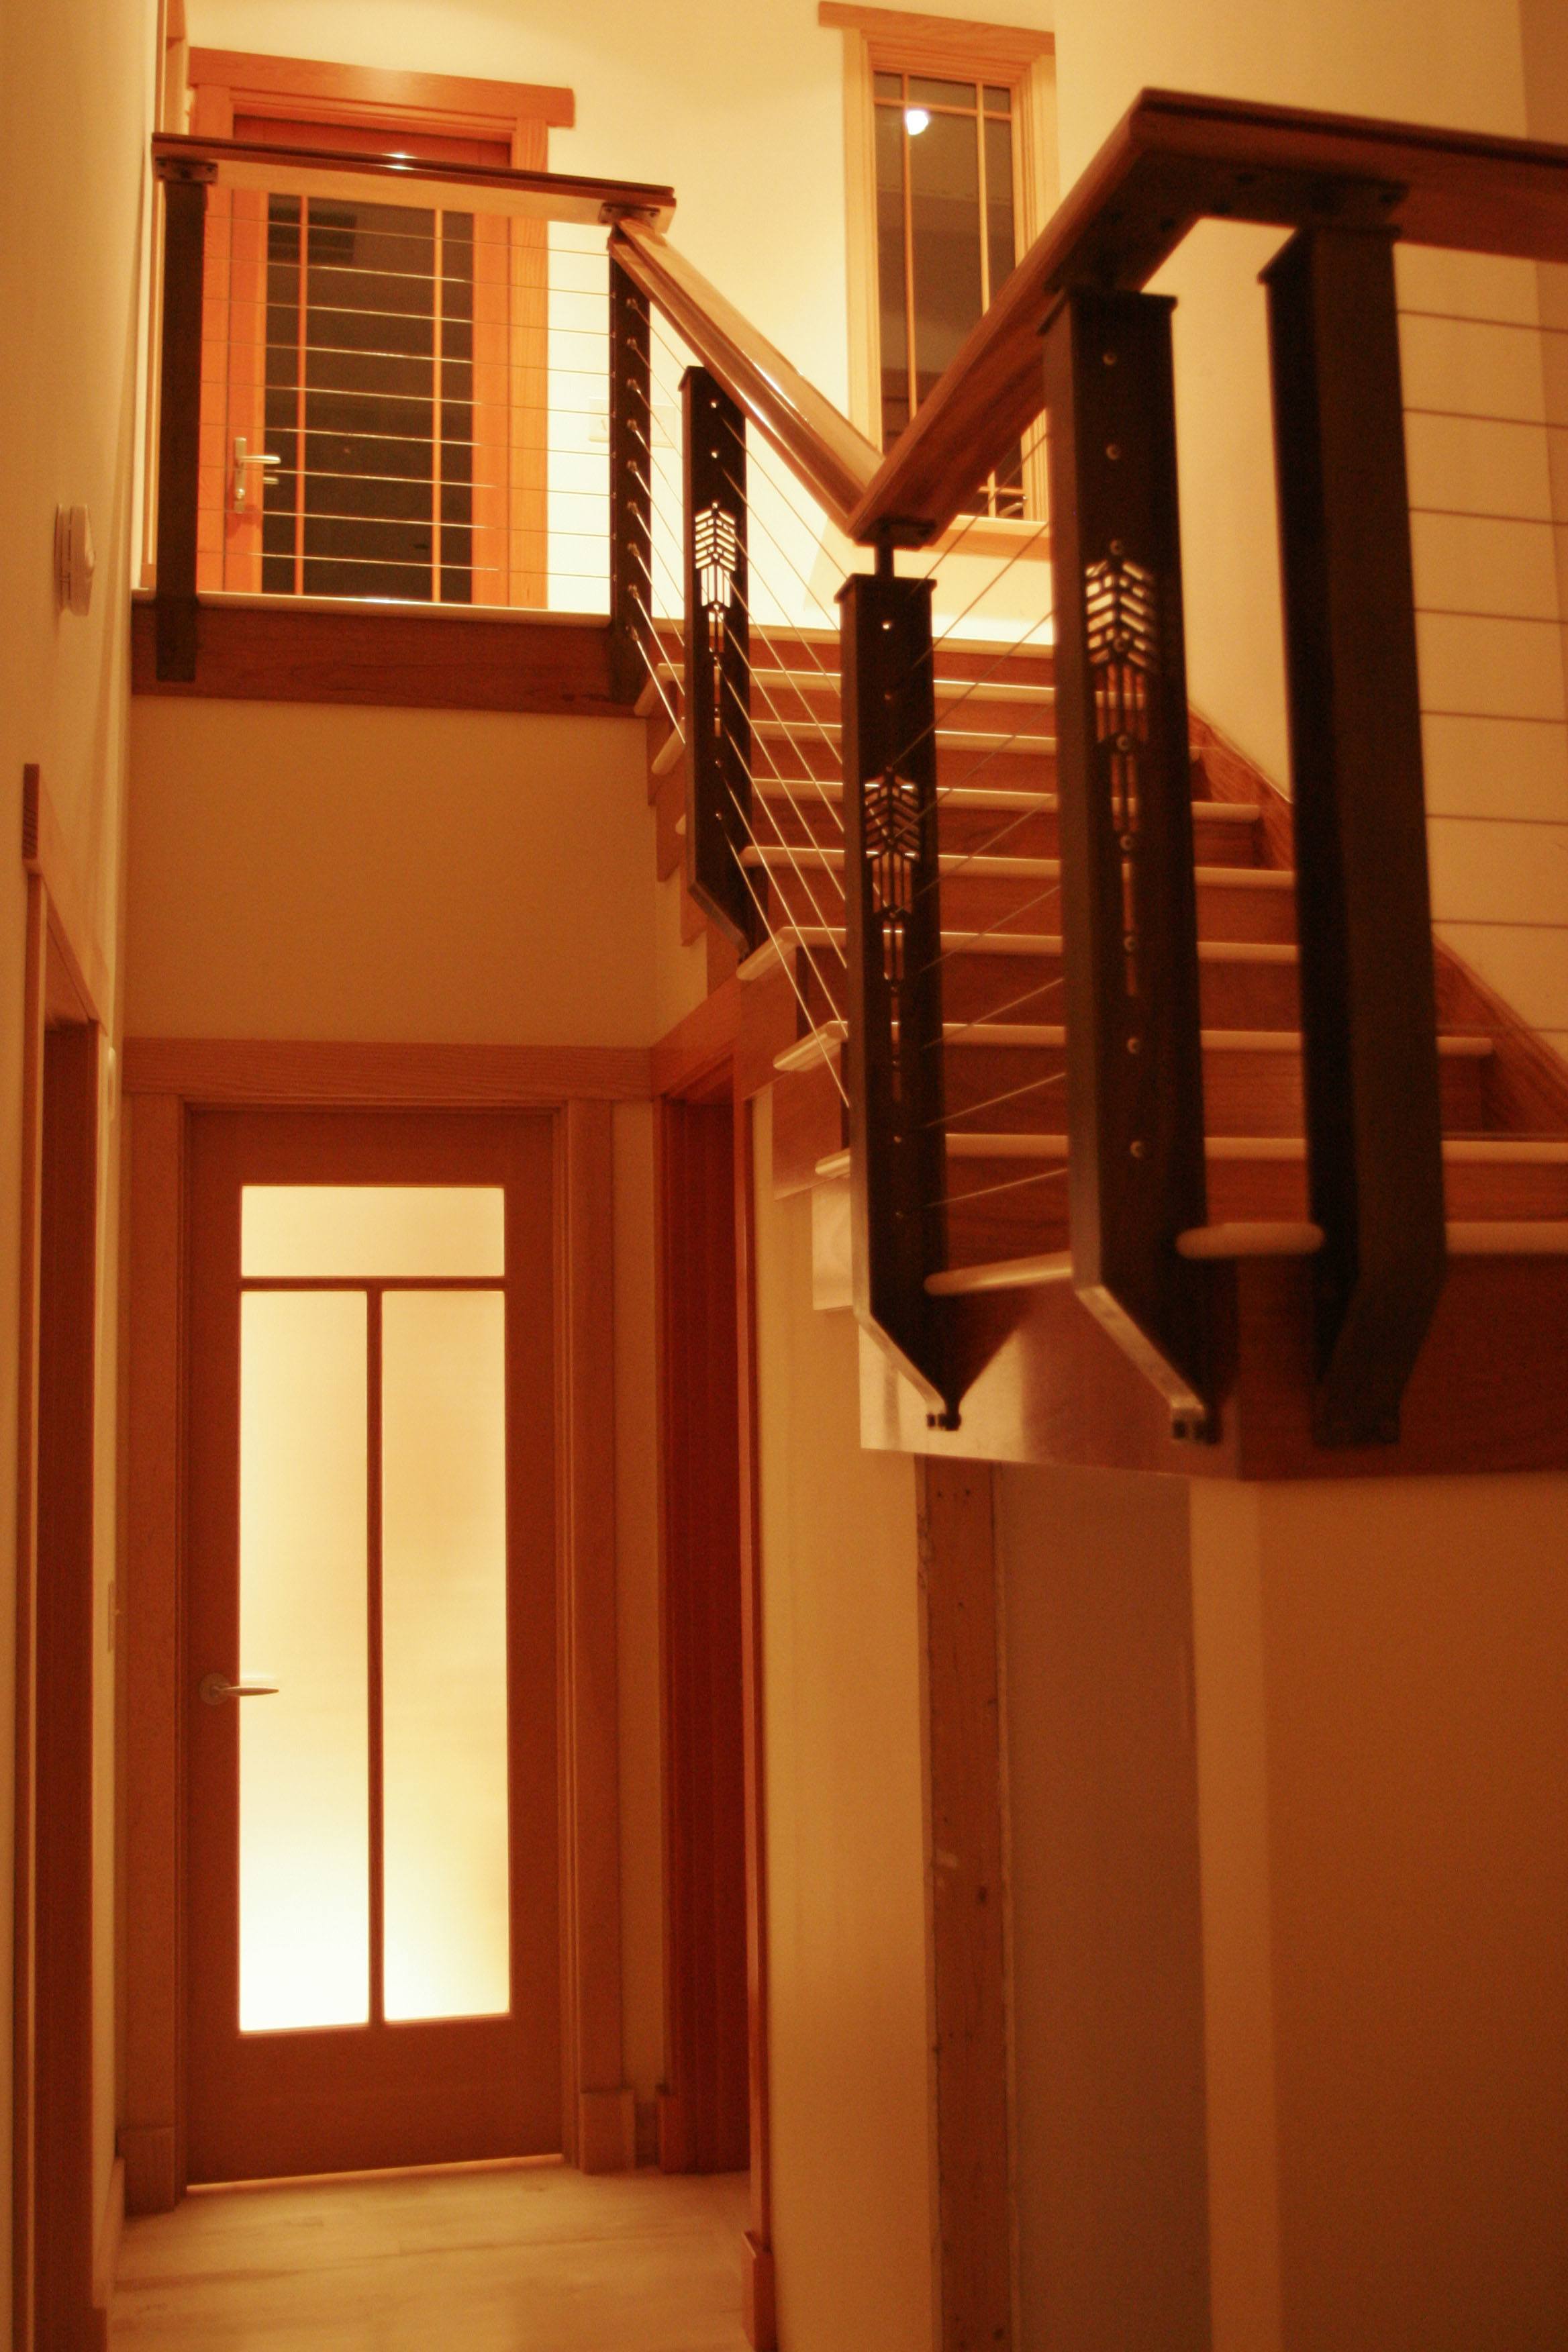 Prarie style cable railing interior